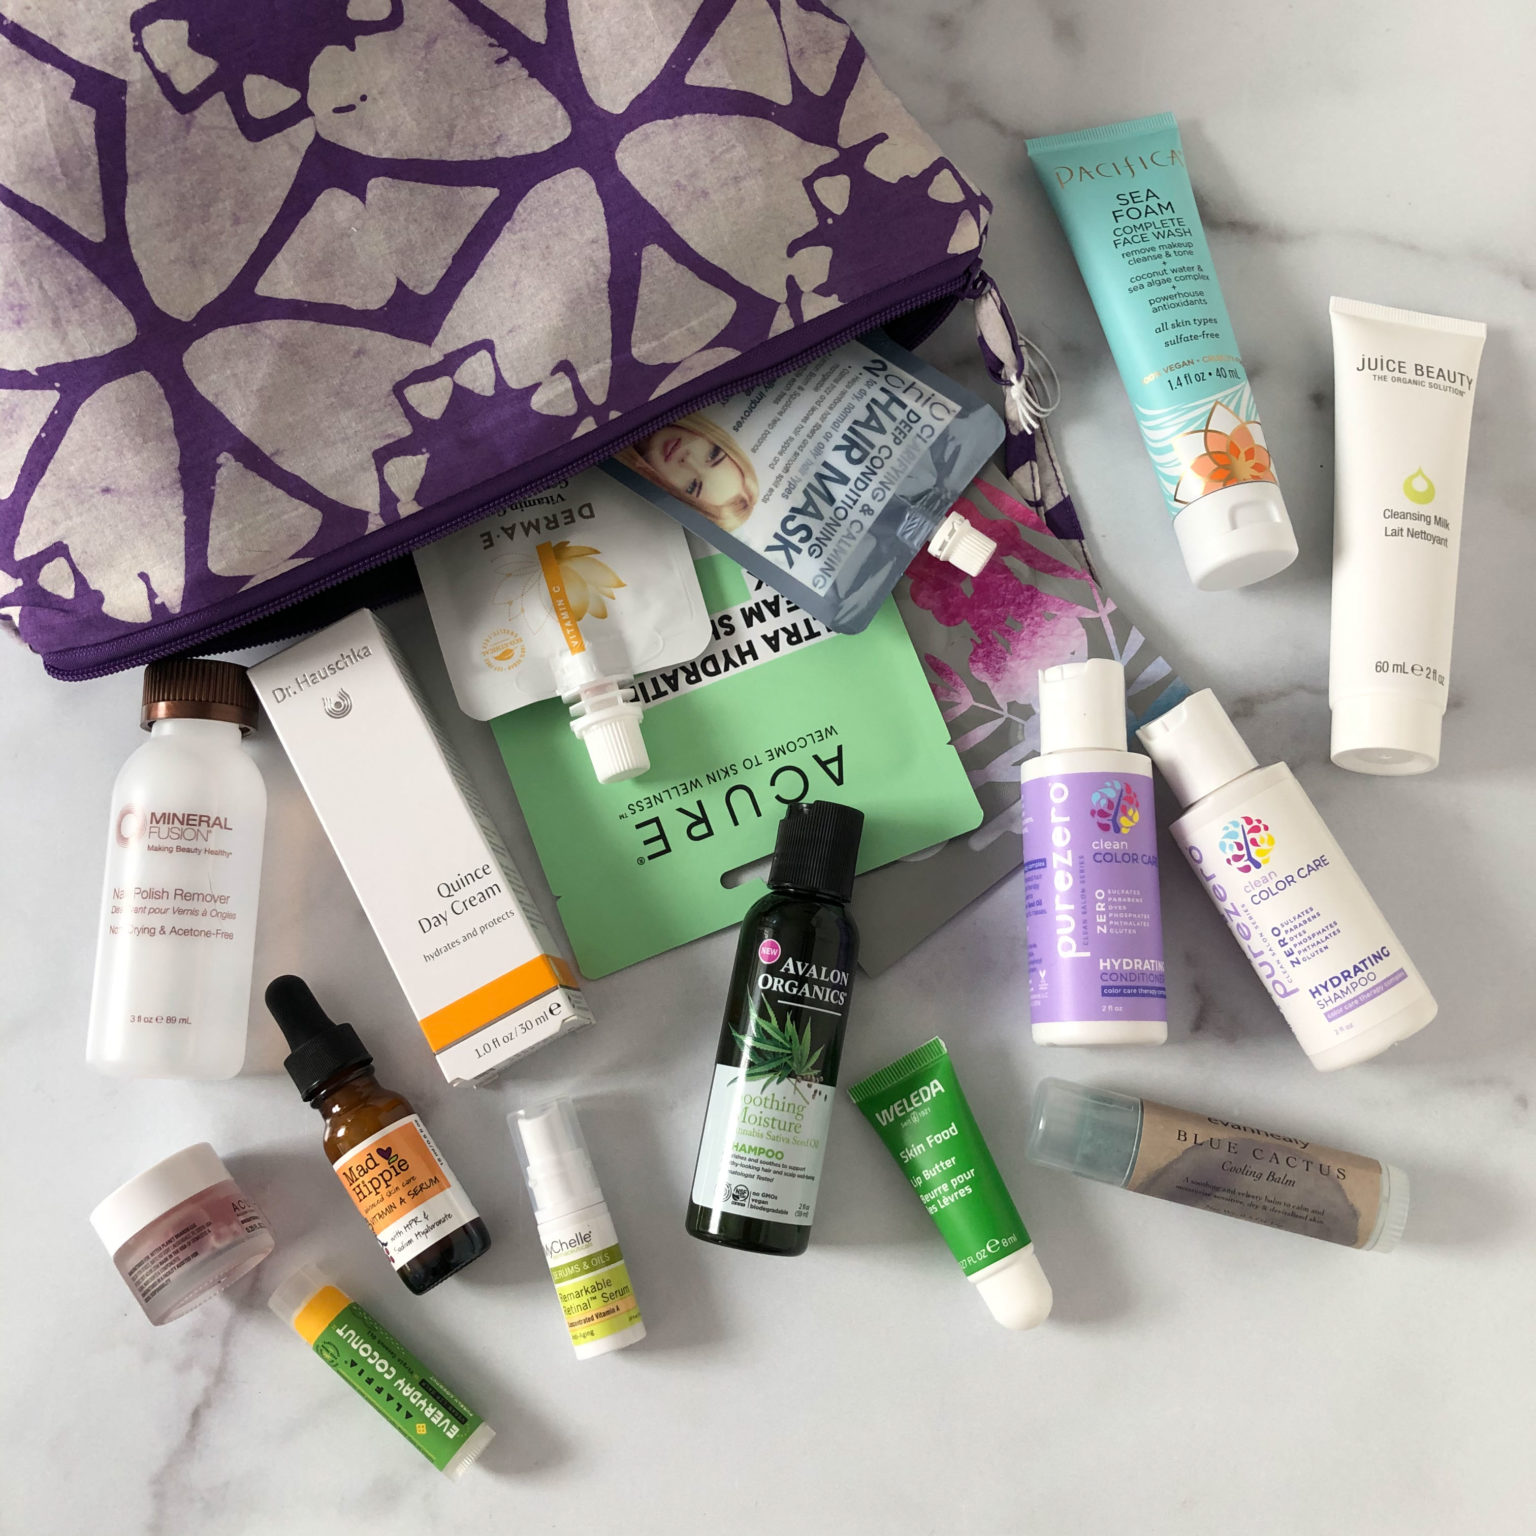 Whole Foods Beauty "The New Essentials" Review MSA